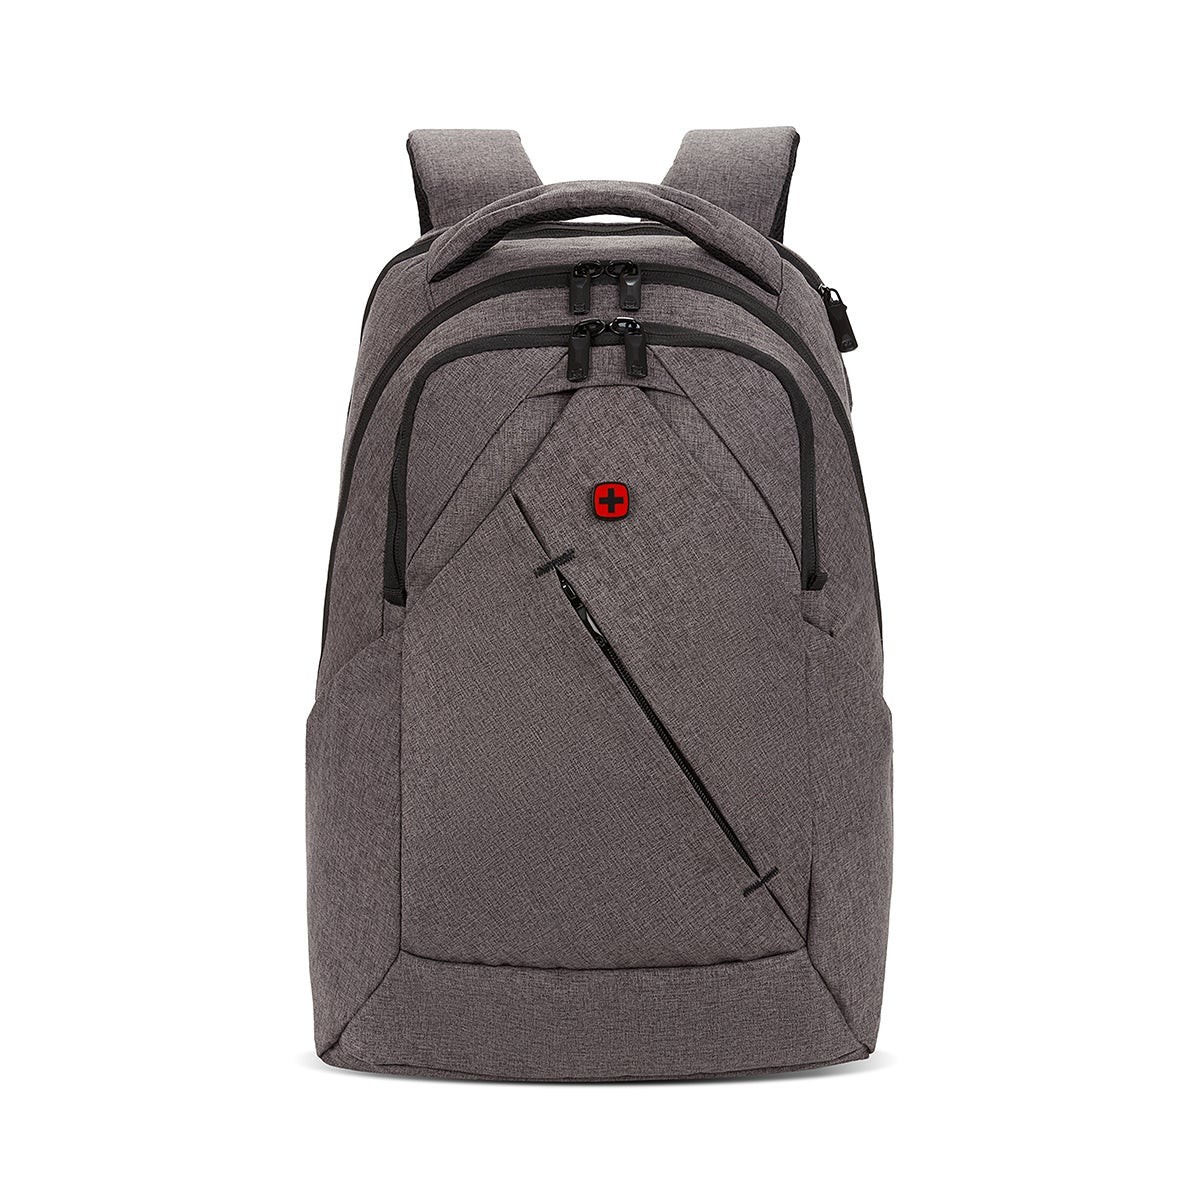 MoveUp 16" Laptop Backpack Charcoal Heather